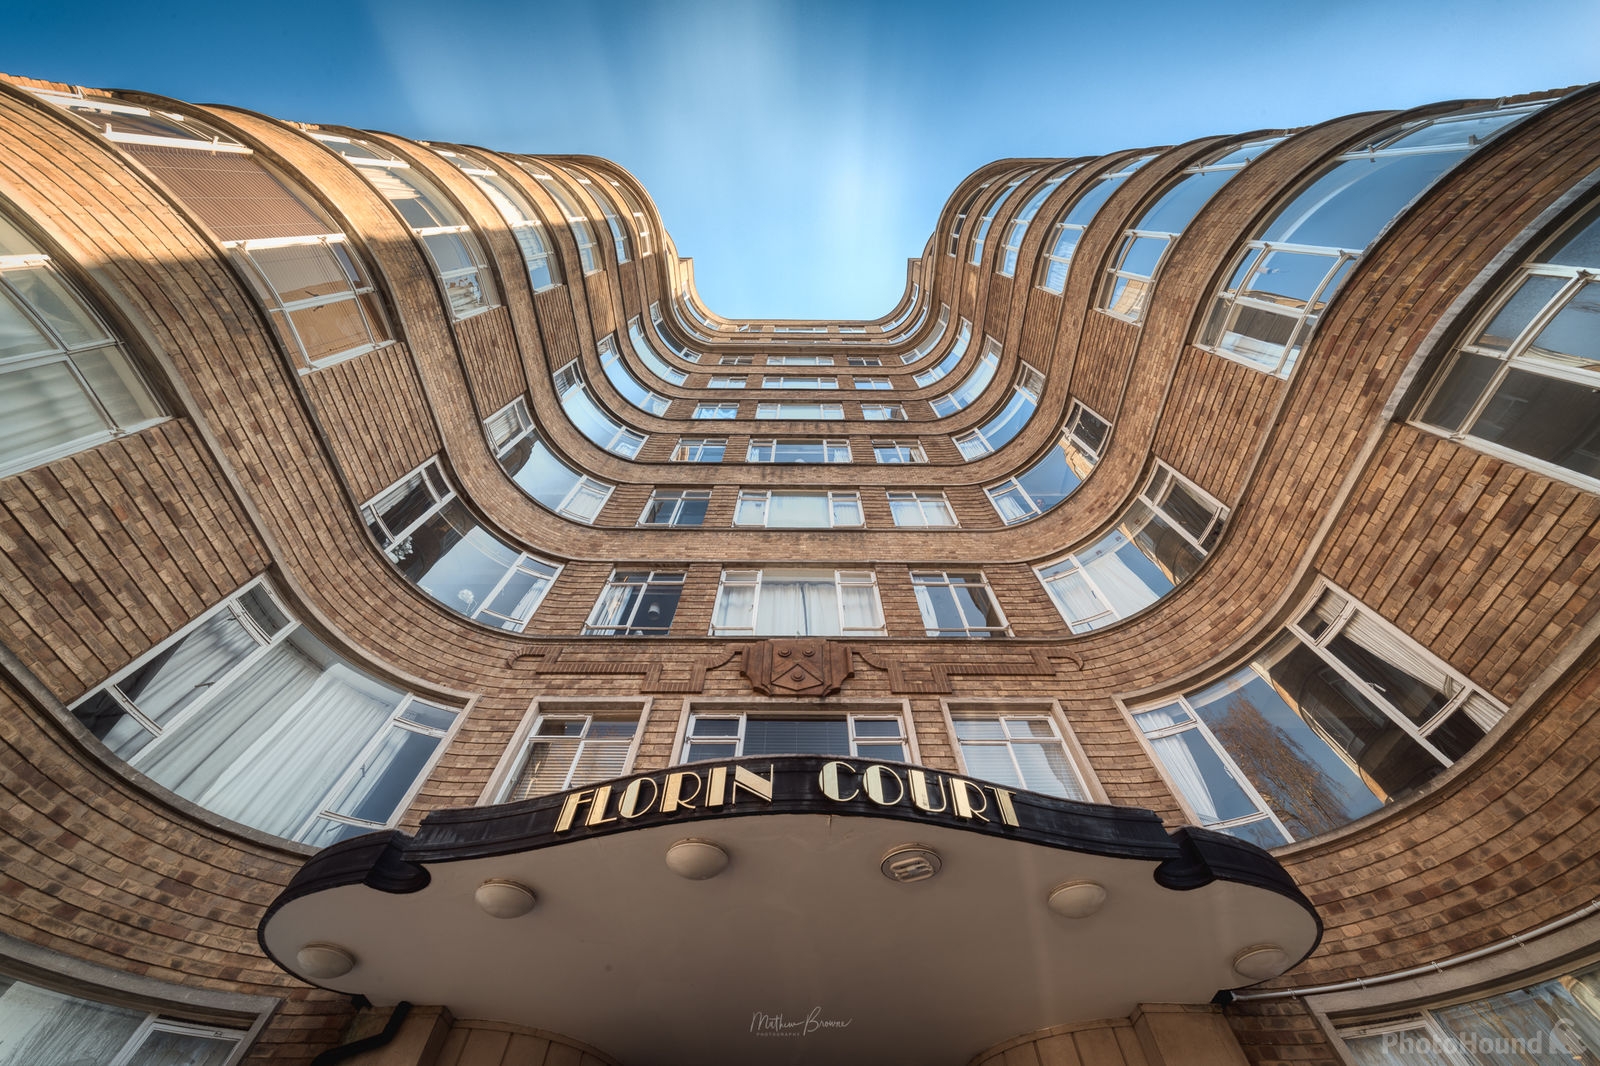 Image of Florin Court by Mathew Browne